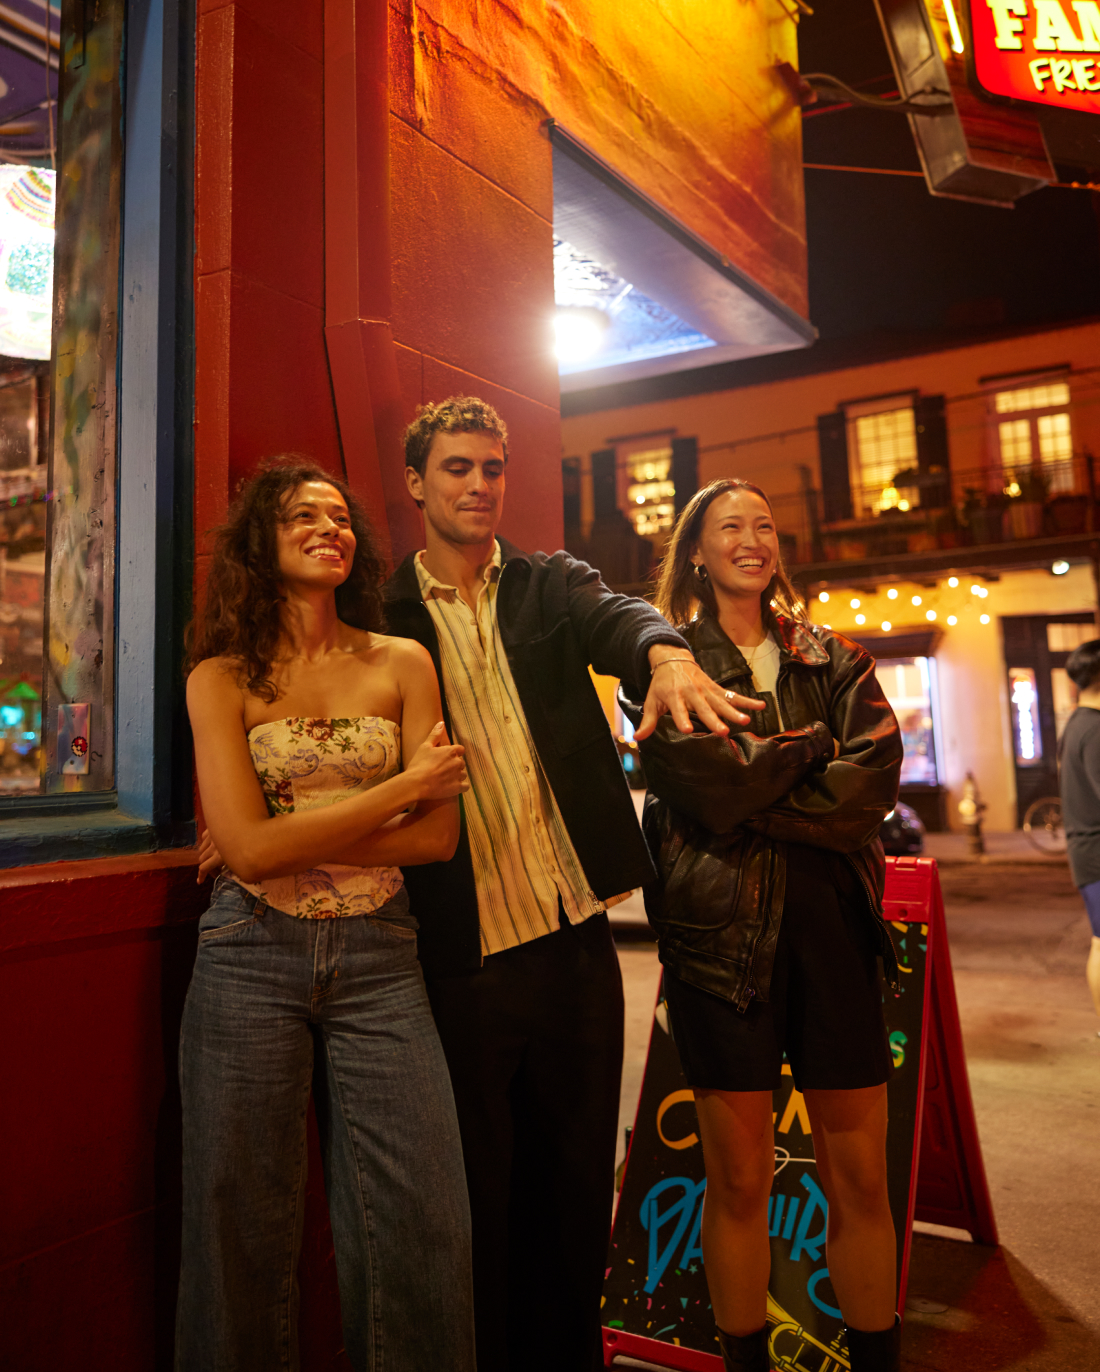 Three friends enjoying an evening out, standing and laughing together near a colorful street corner illuminated by neon lights.